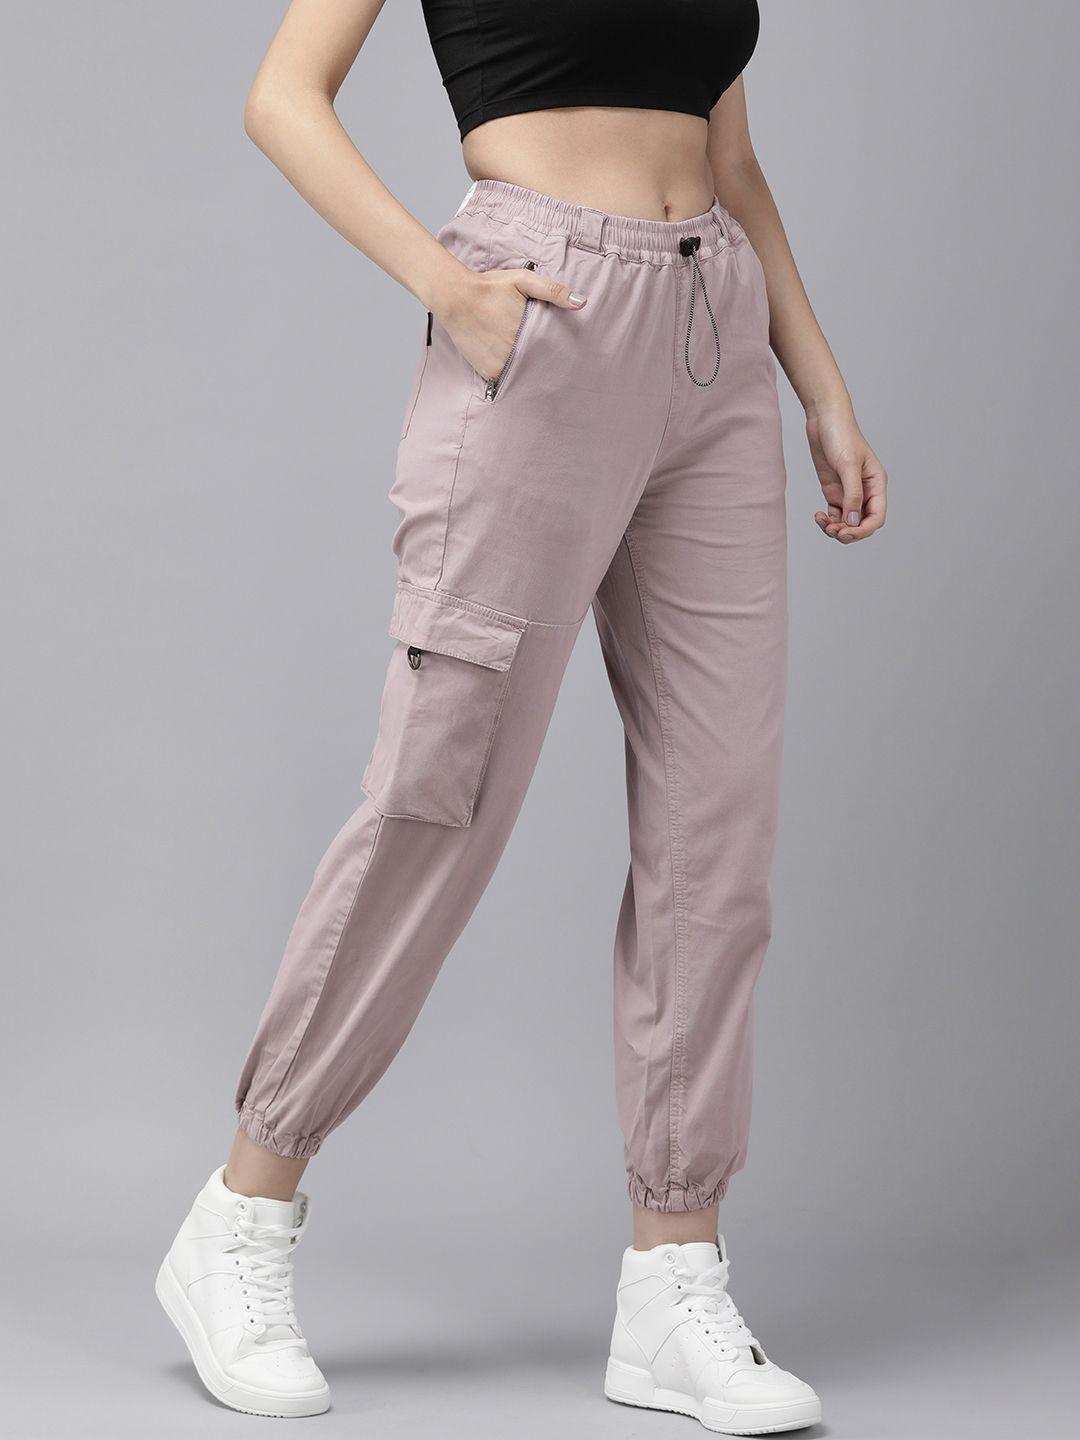 the roadster life co. women mid-rise joggers